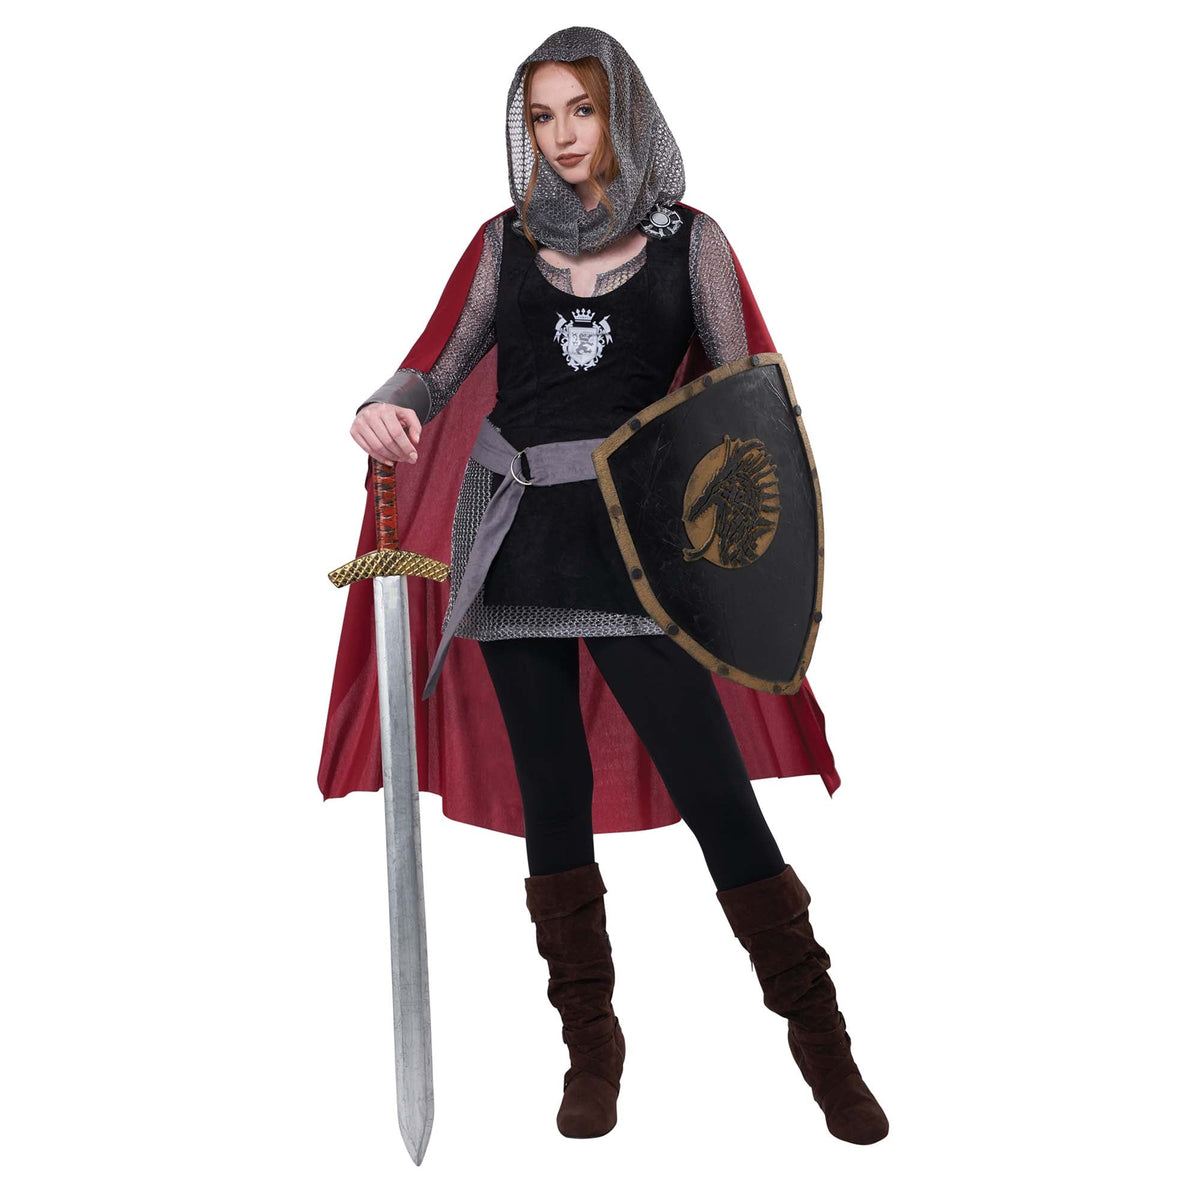 CALIFORNIA COSTUMES Costumes Medieval Lady Knight Costume for Adults, Chainmail Dress